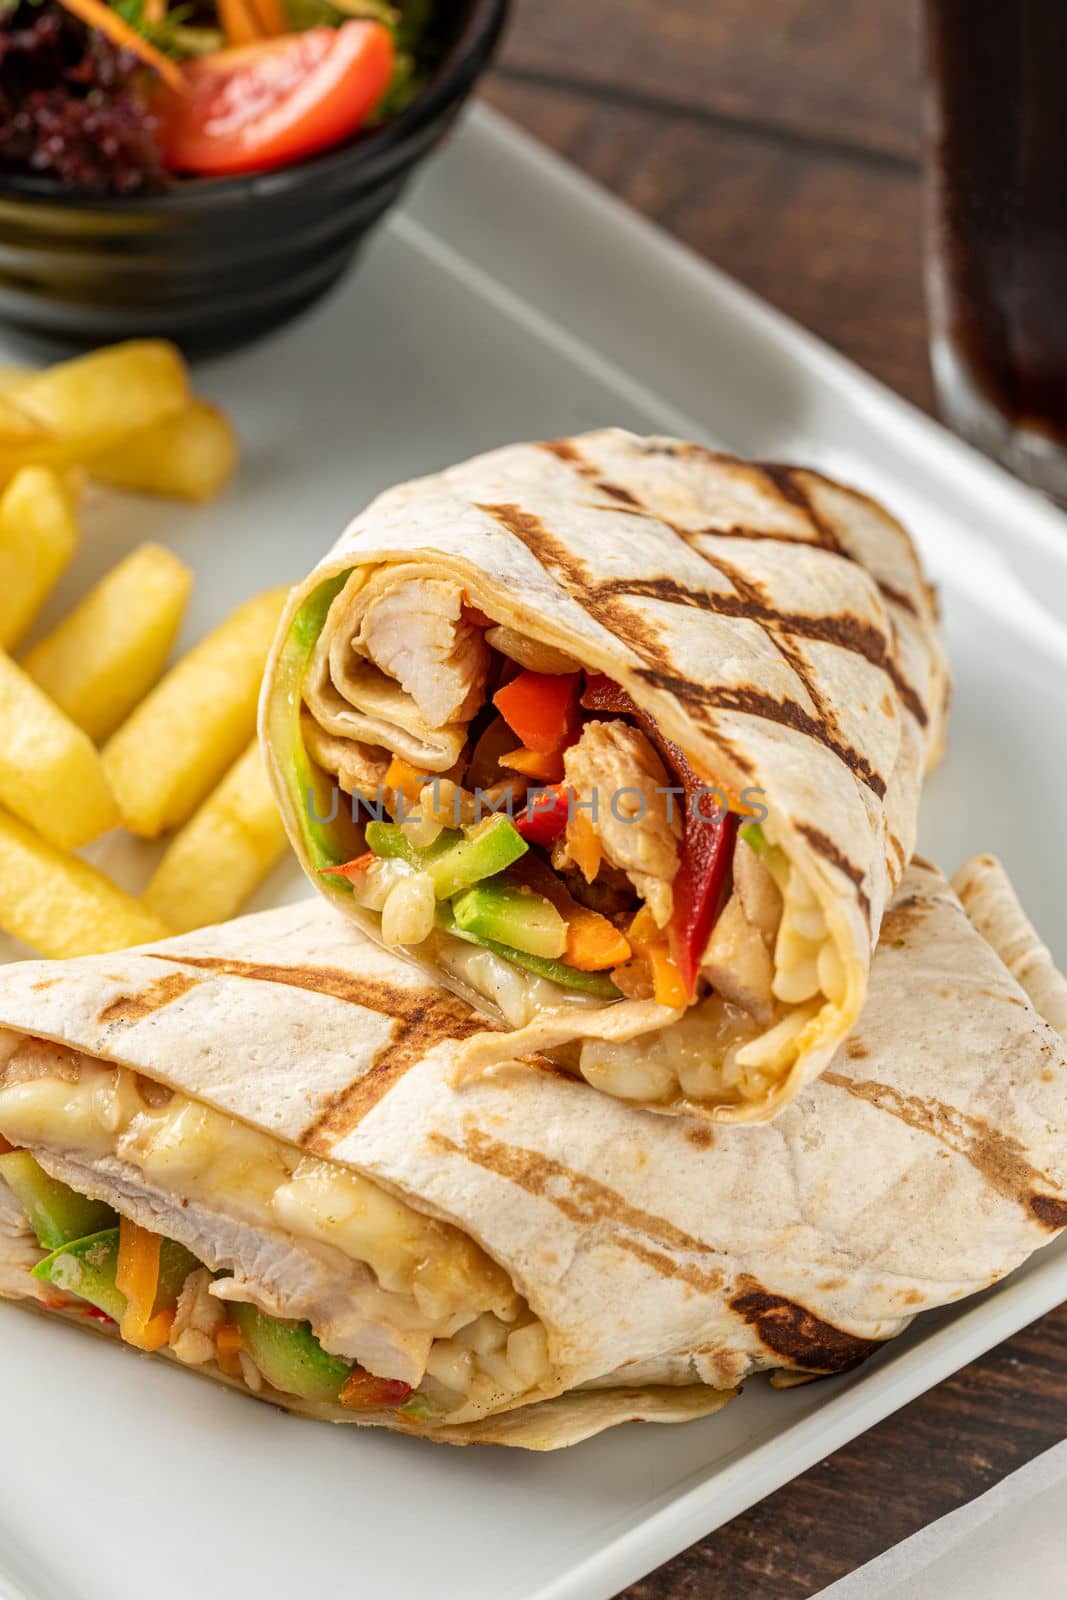 Chicken veggie wrap with french fries and salad by Sonat